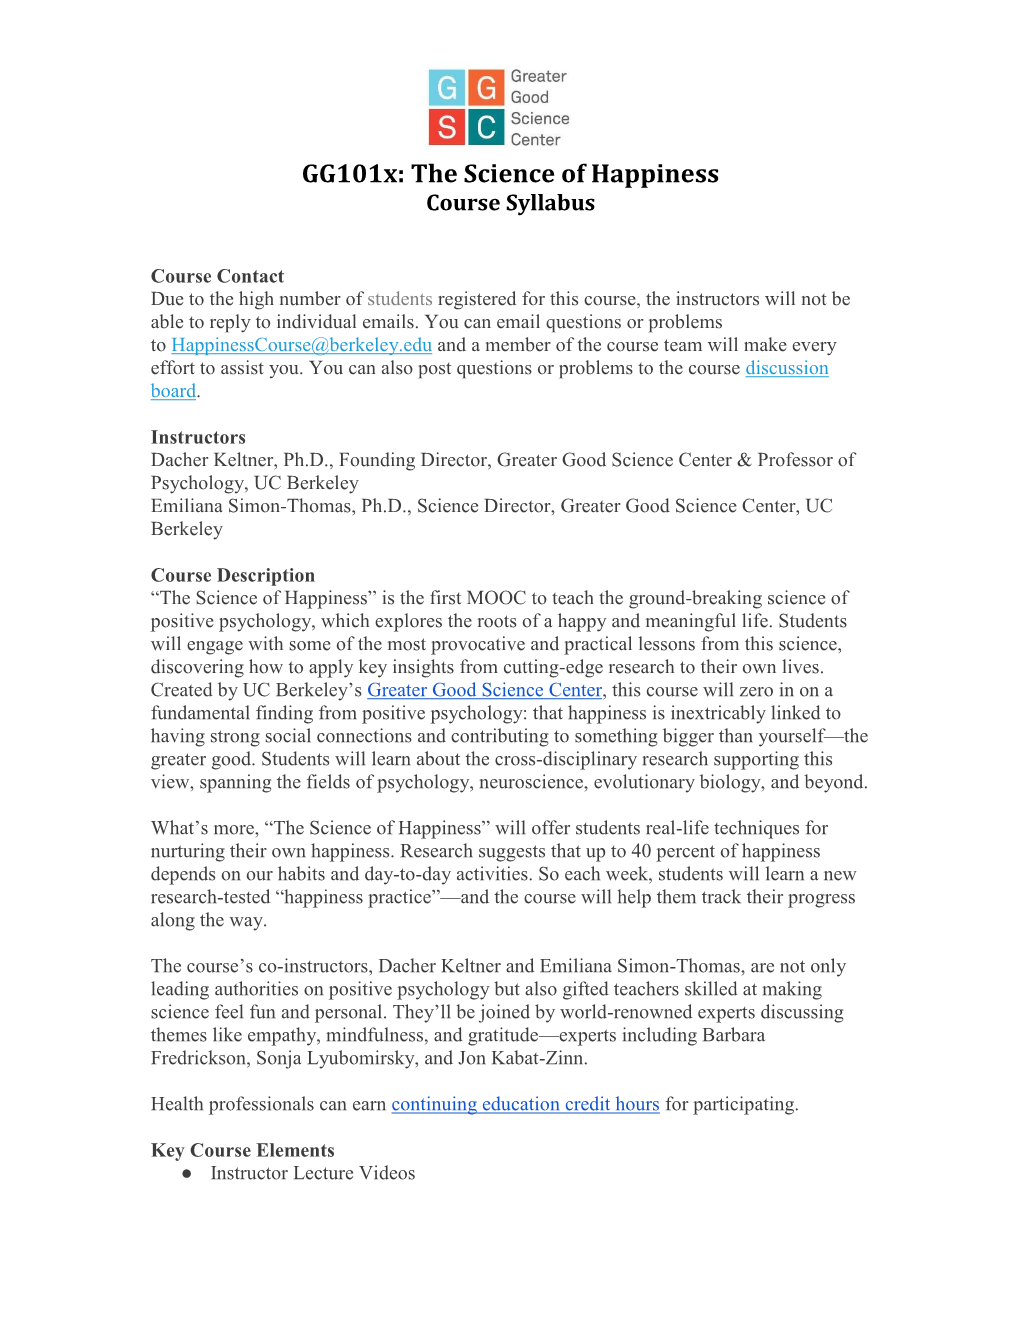 Gg101x: the Science of Happiness Course Syllabus